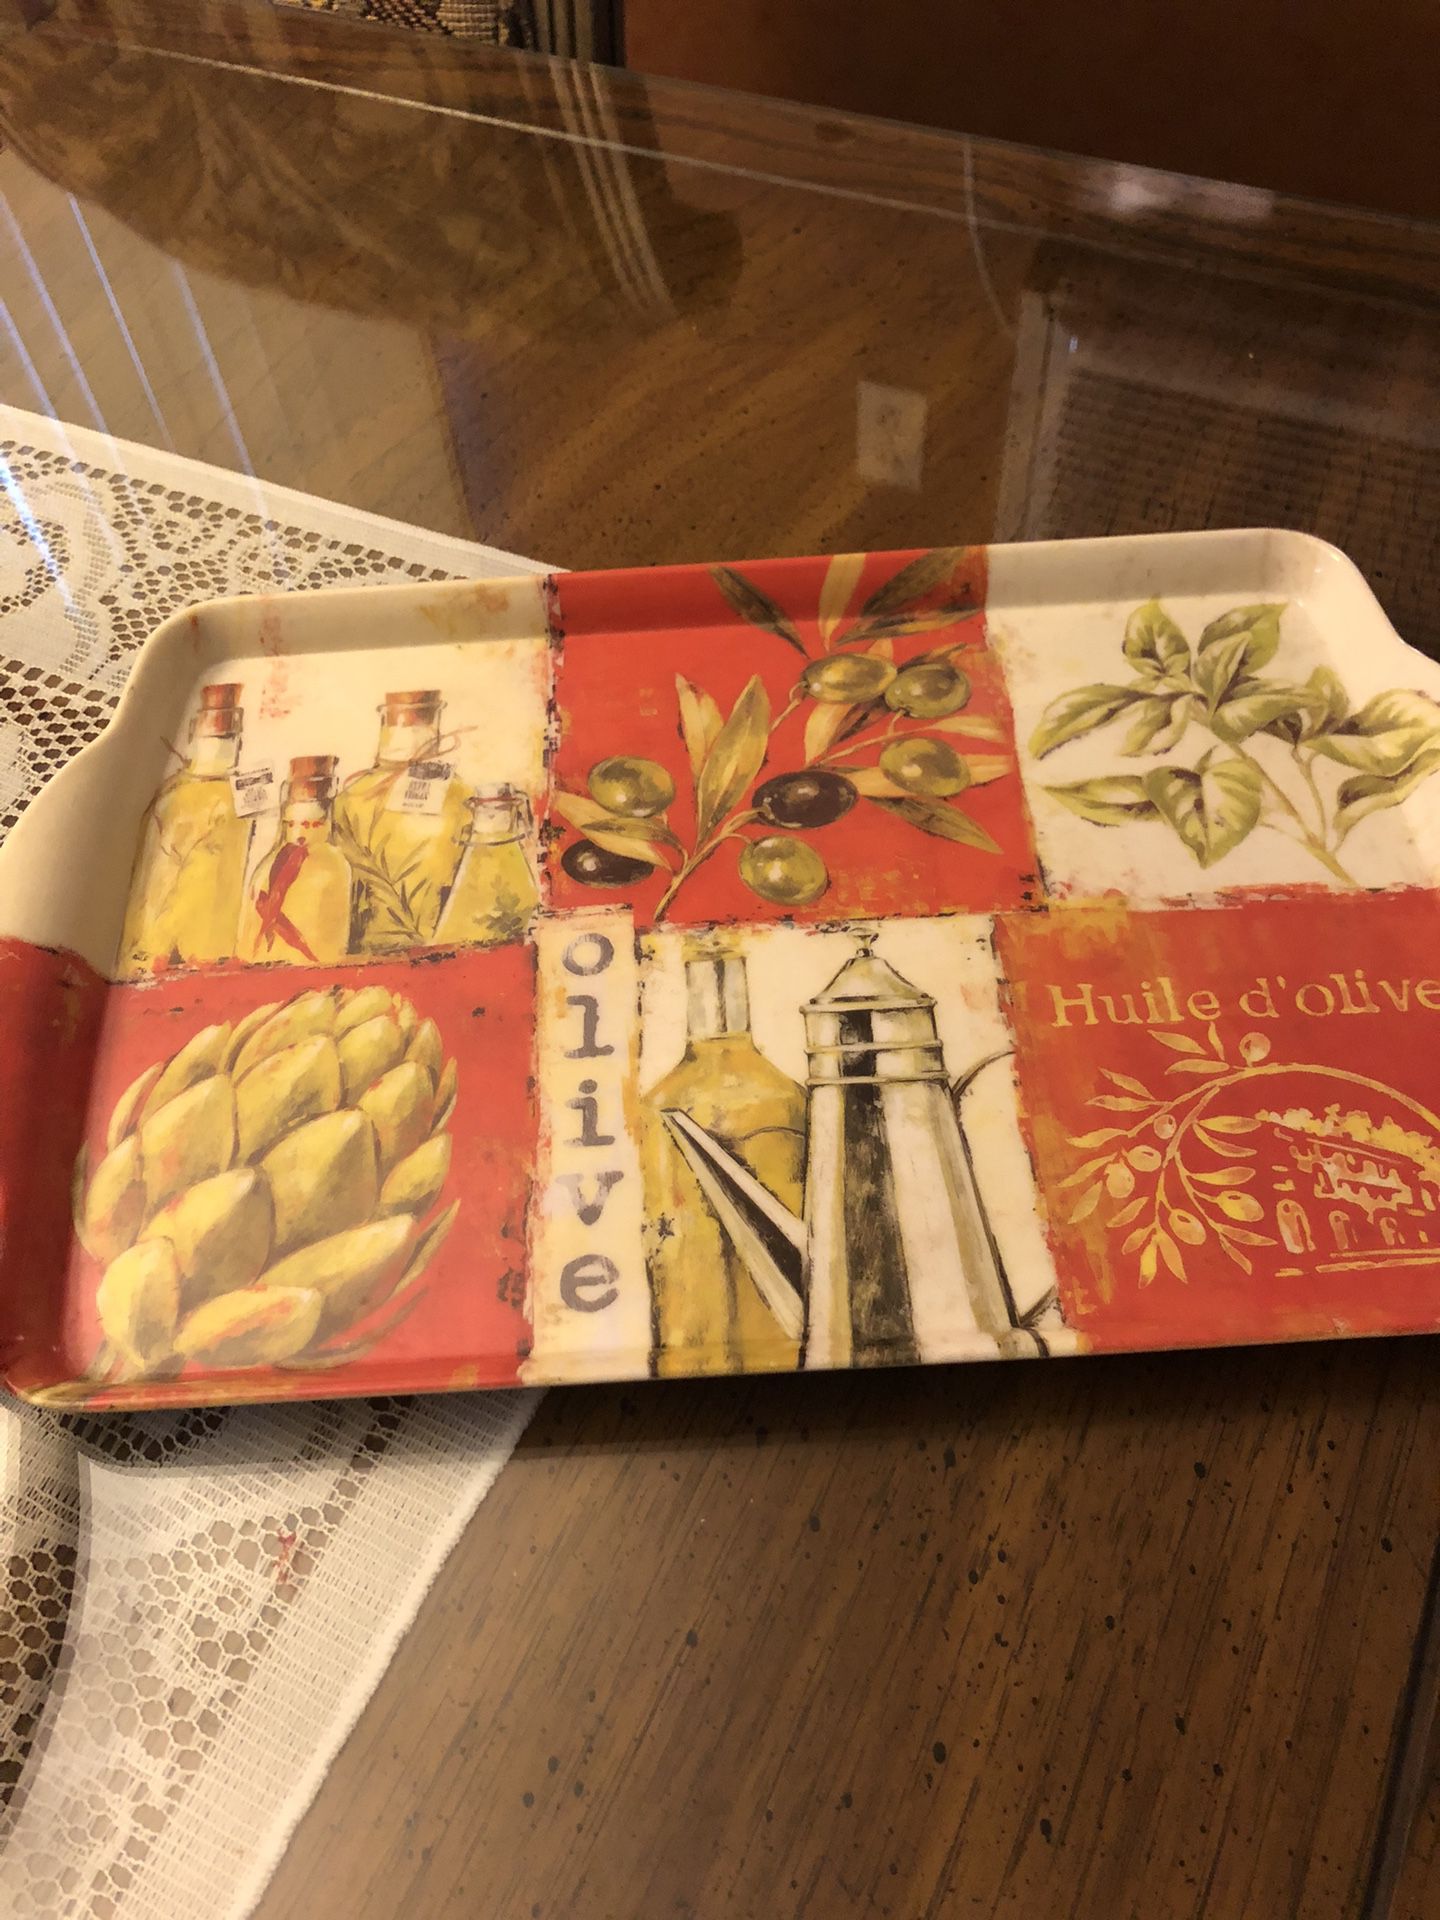 Two Serving Trays One Larger Then The Other$5 Each